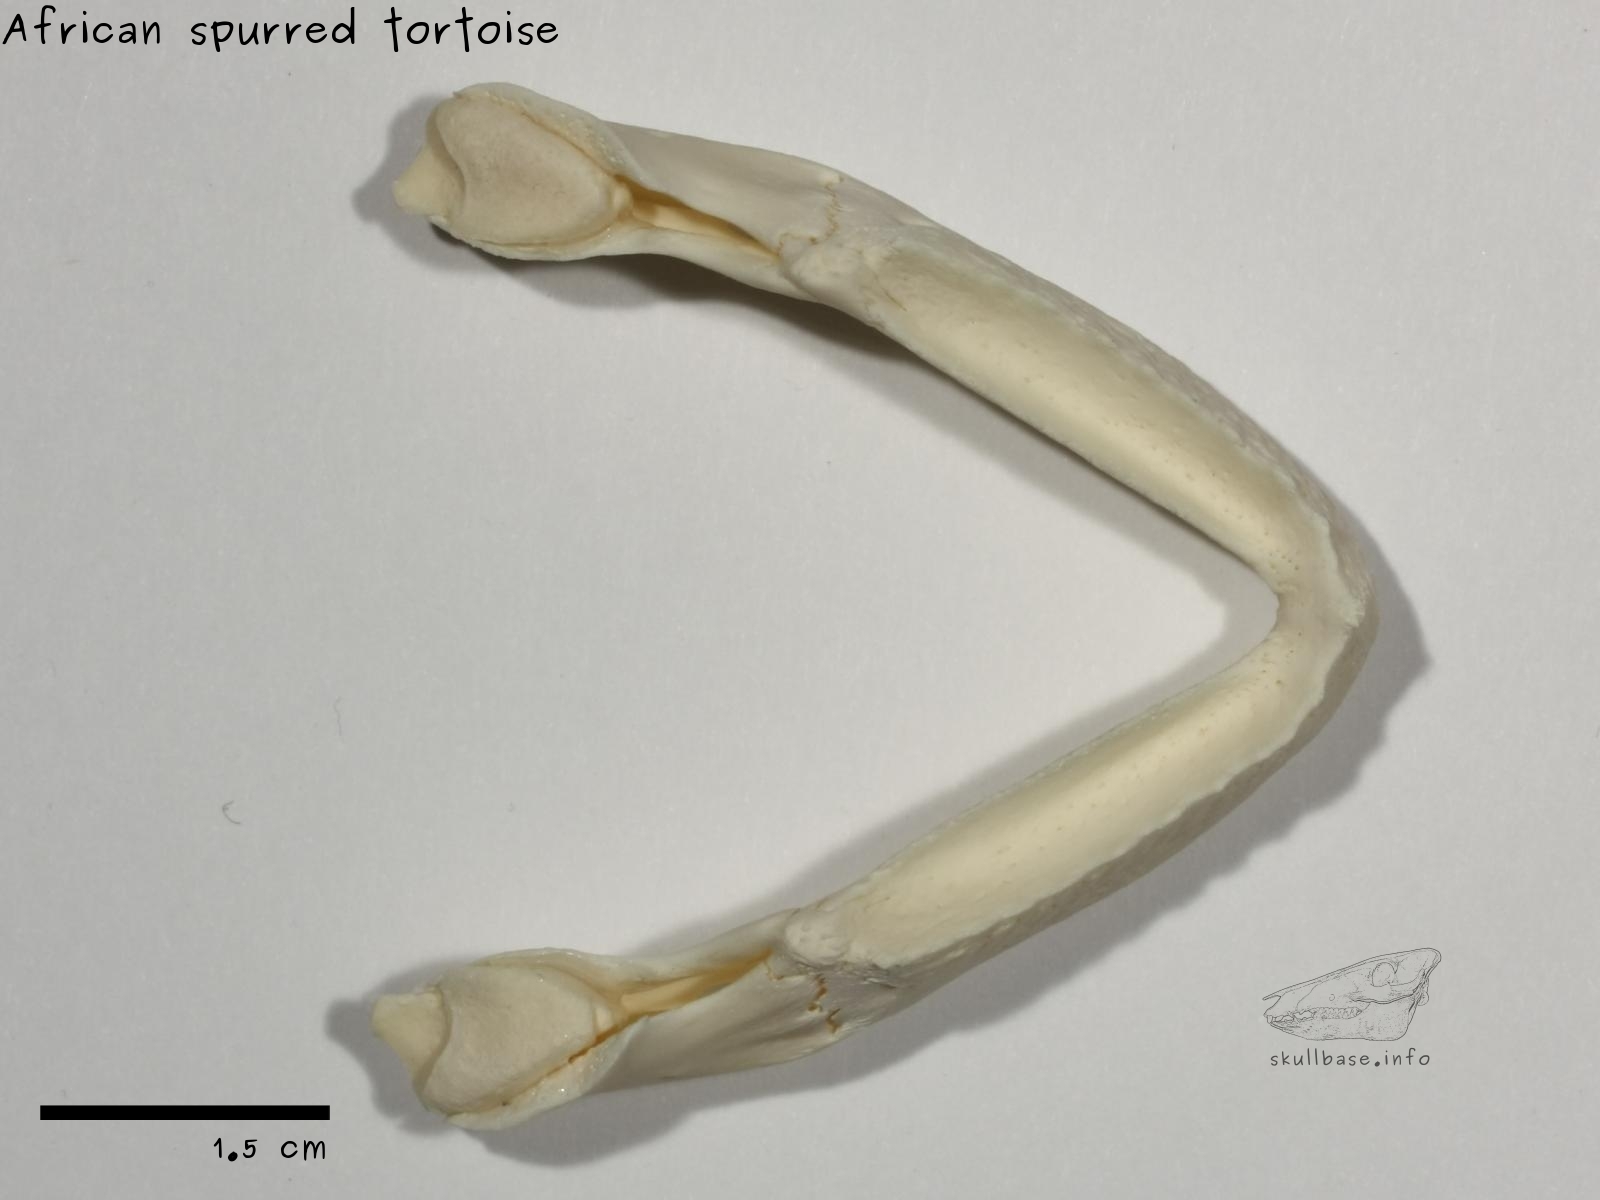 African spurred tortoise (Centrochelys sulcata) jaw